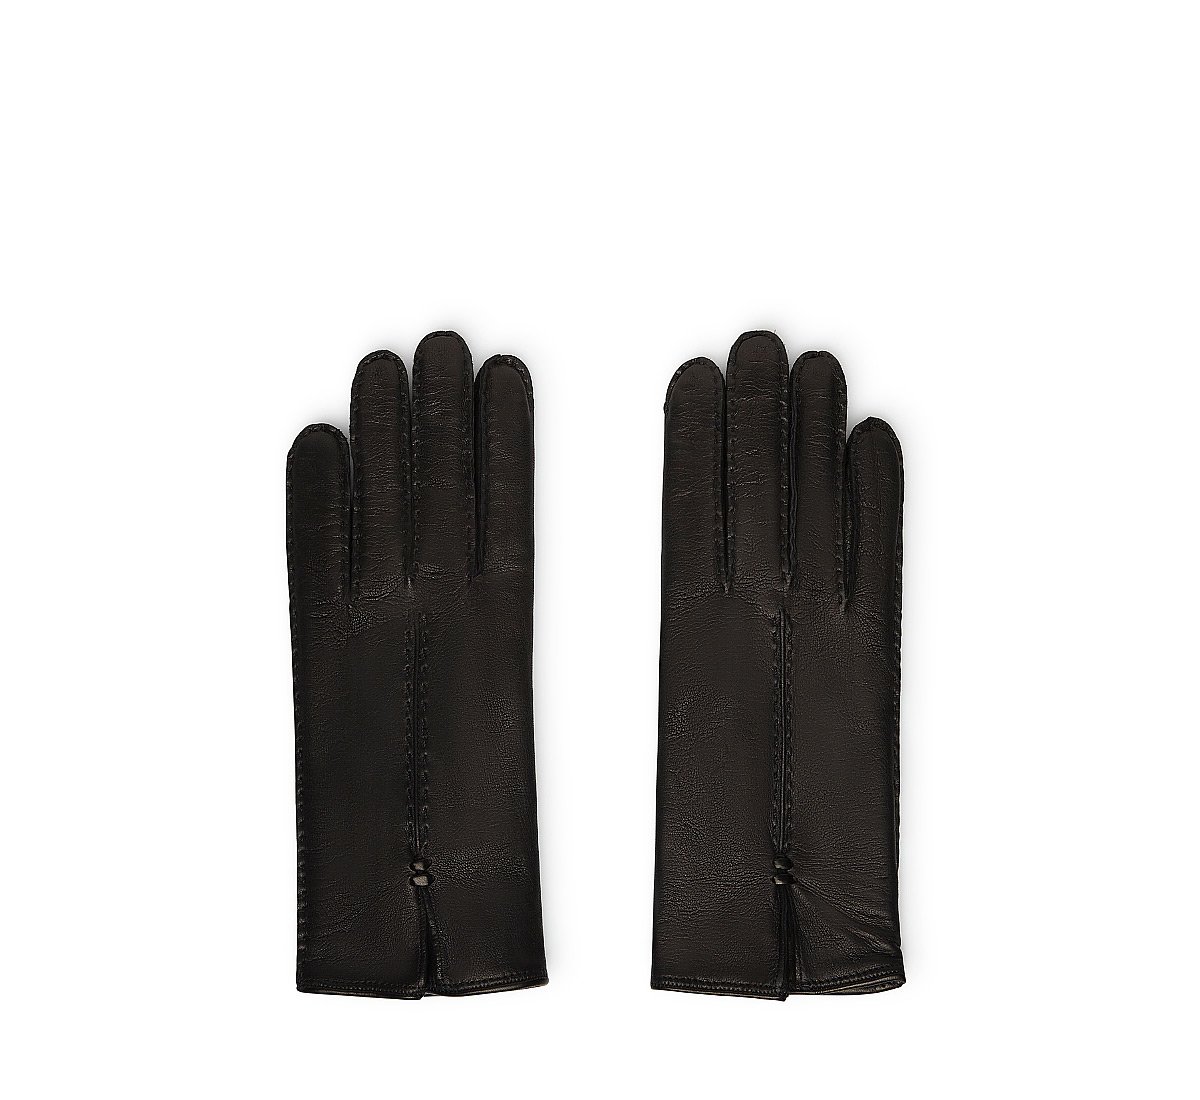 Gloves with stitching